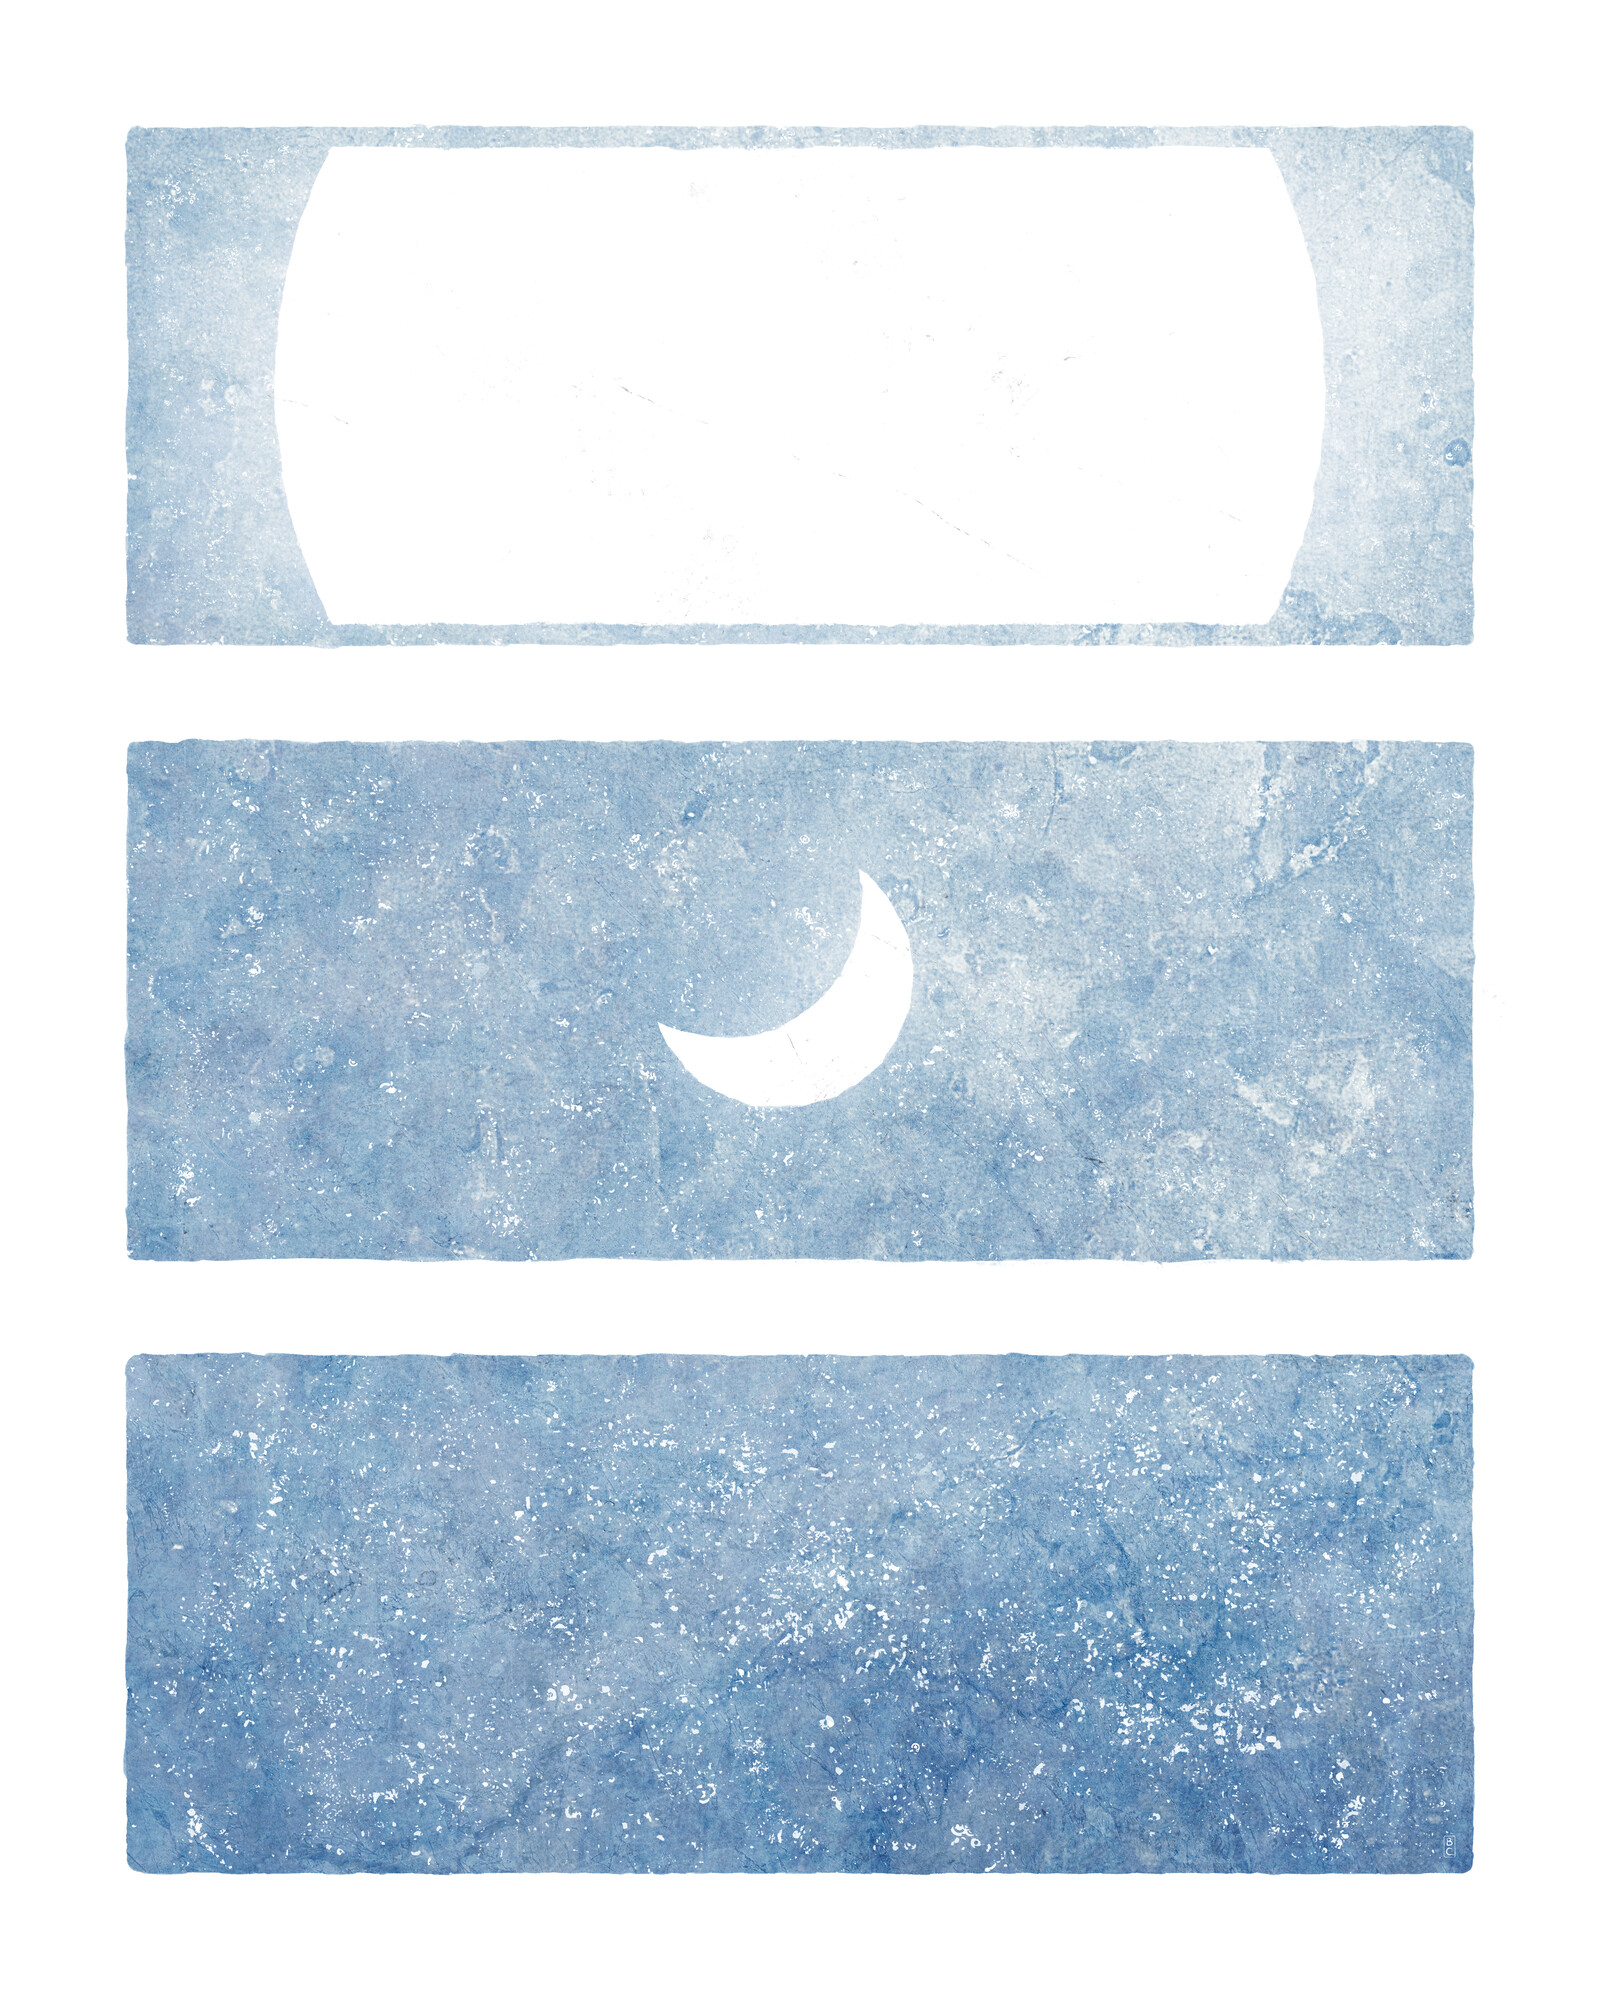 Three blue panels in a vertical layout. The top panel has a glowing white circle at center, large enough that you can't see the whole thing. The middle panel has a small glowing white moon shape at center. The bottom panel has lots of little white dots.